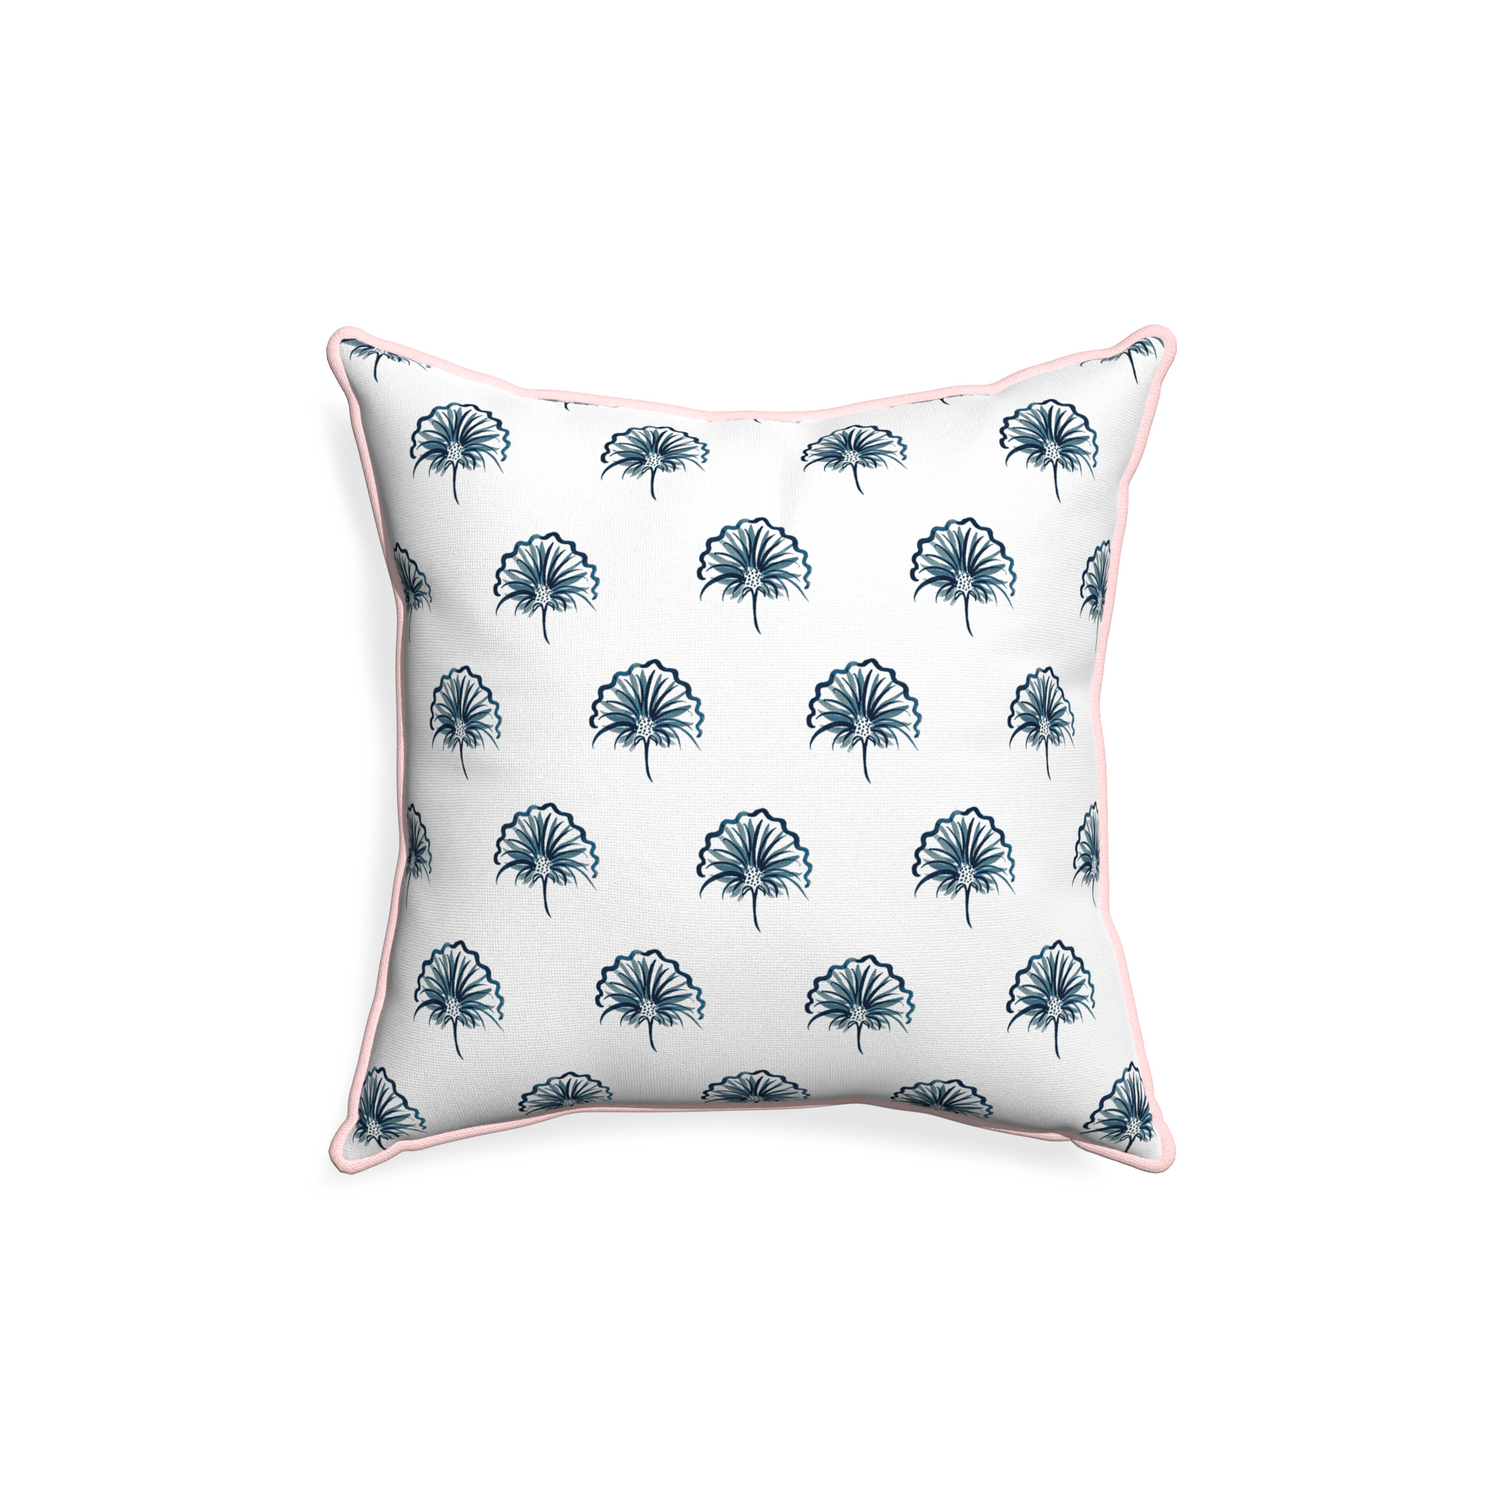 18-square penelope midnight custom floral navypillow with petal piping on white background